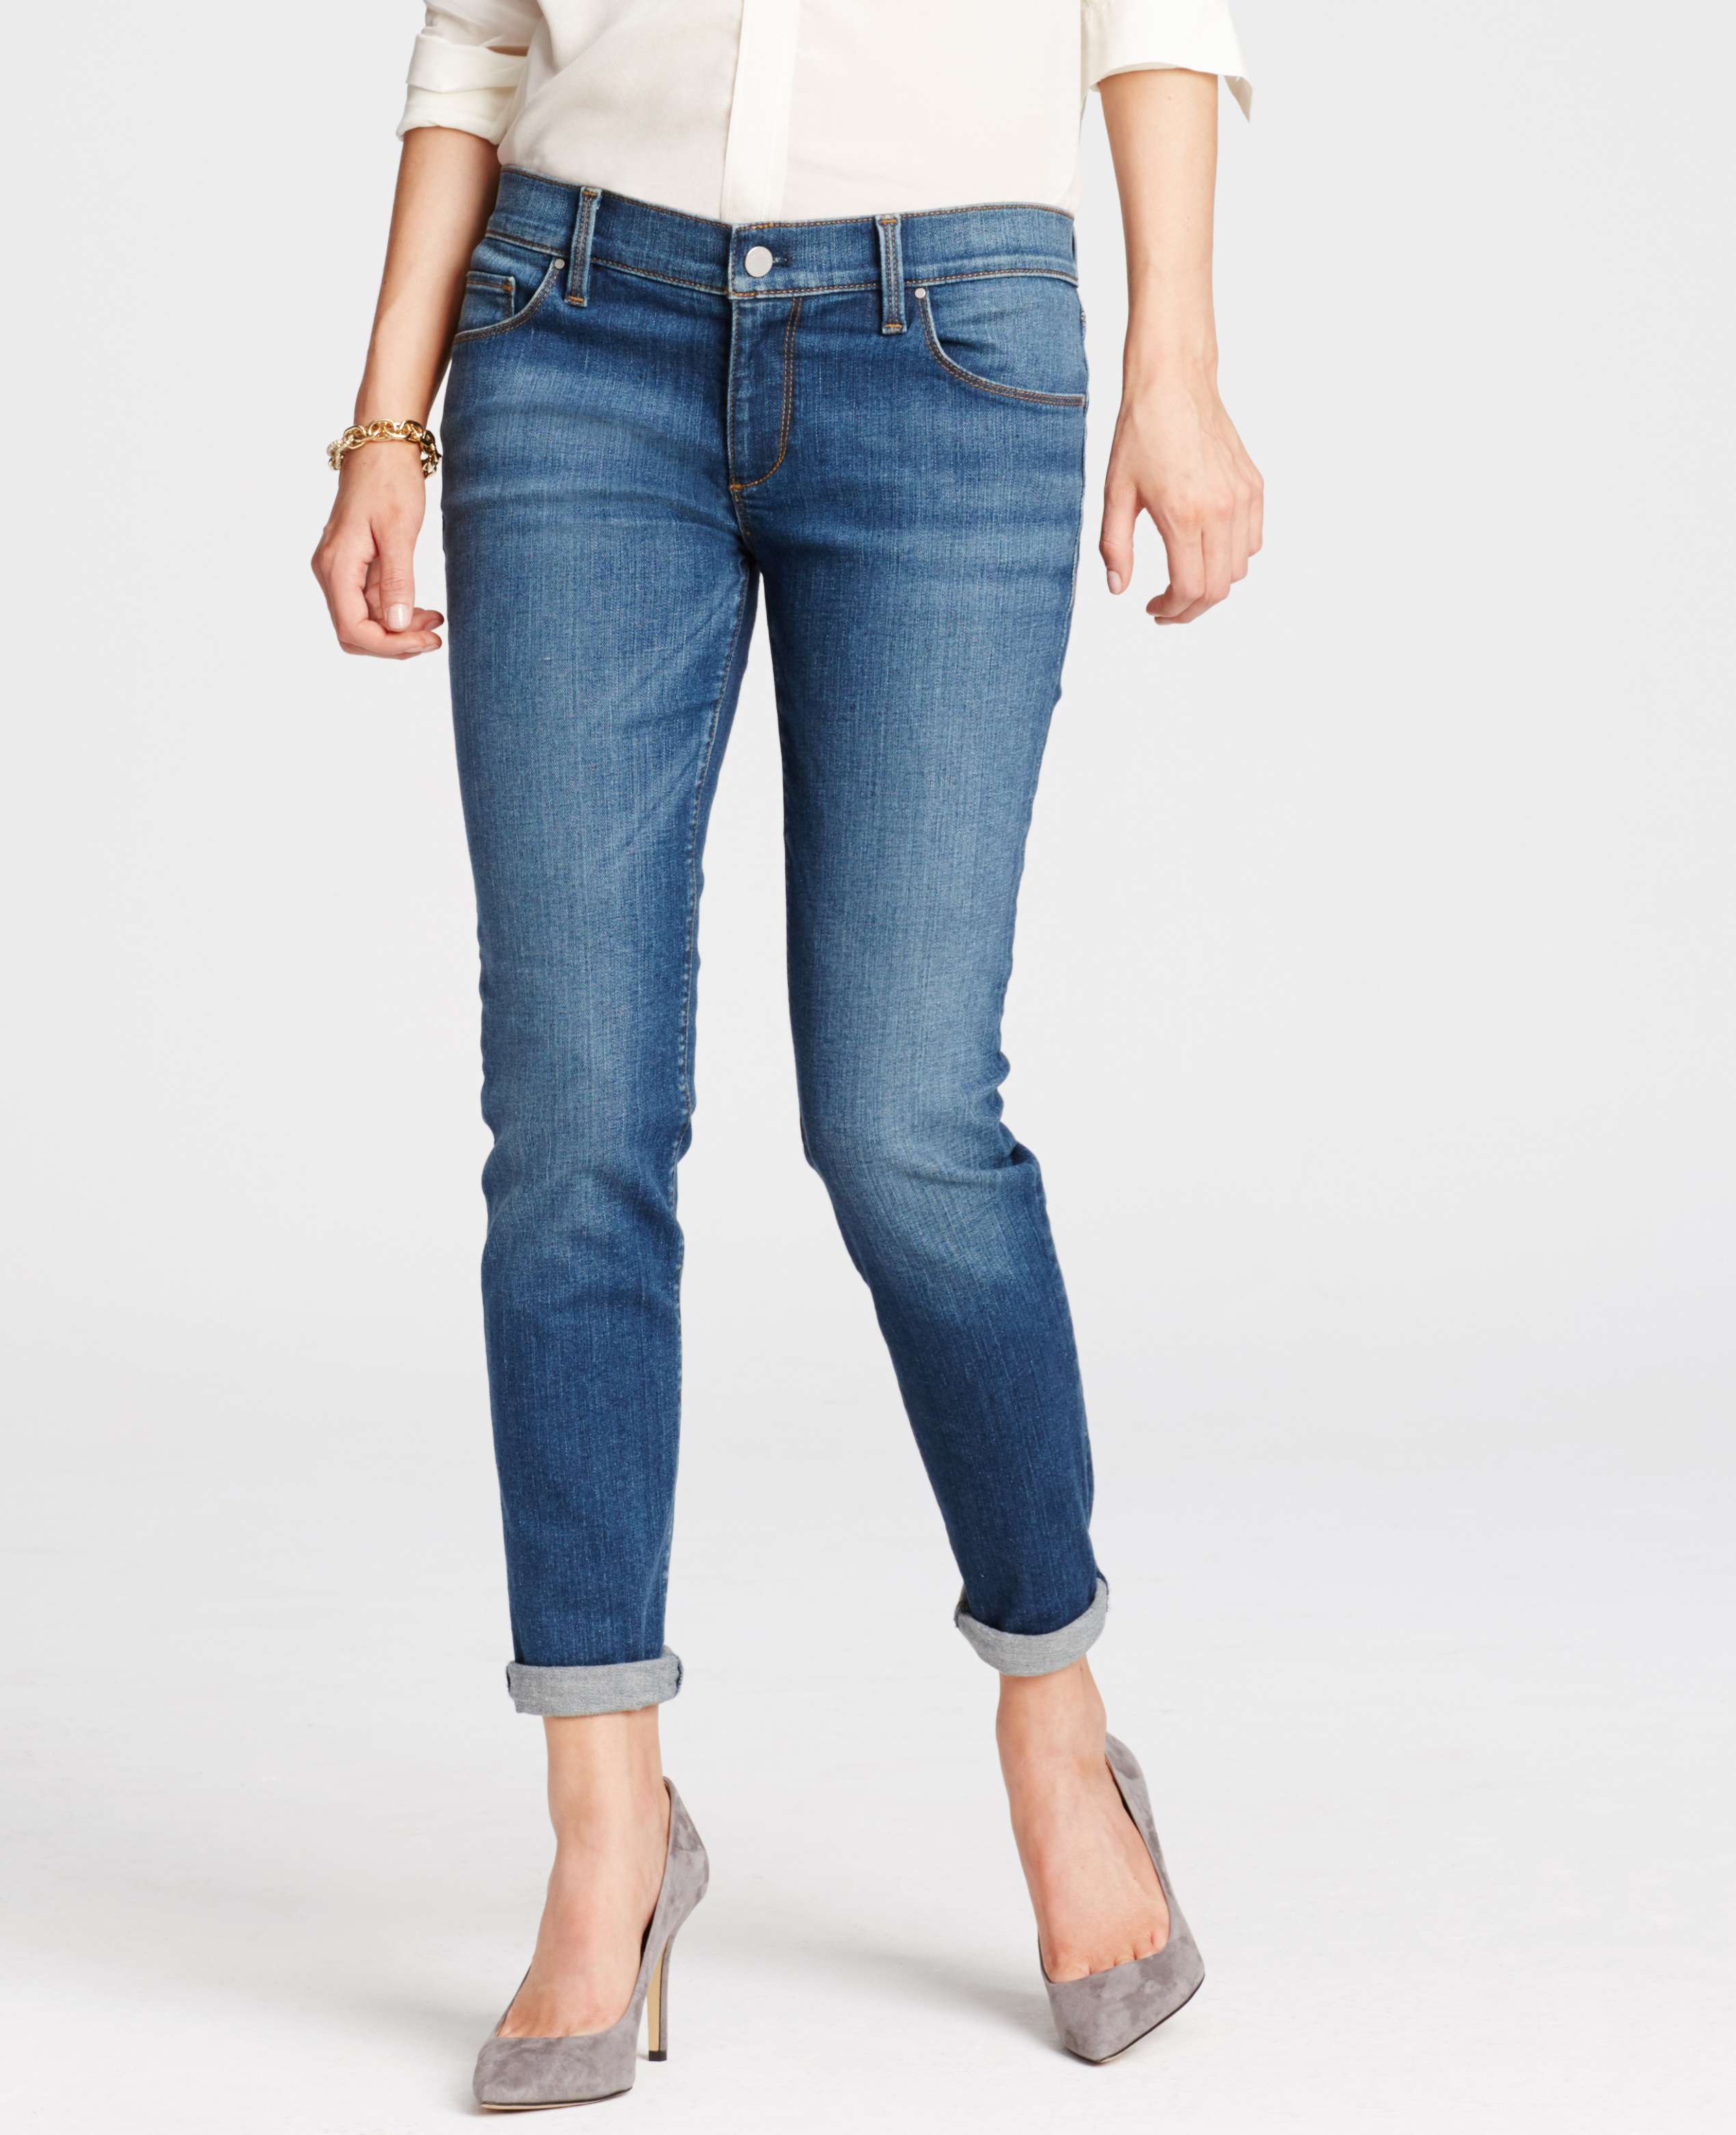 Lyst - Ann Taylor Tall Relaxed Slim Denim Jeans in Blue